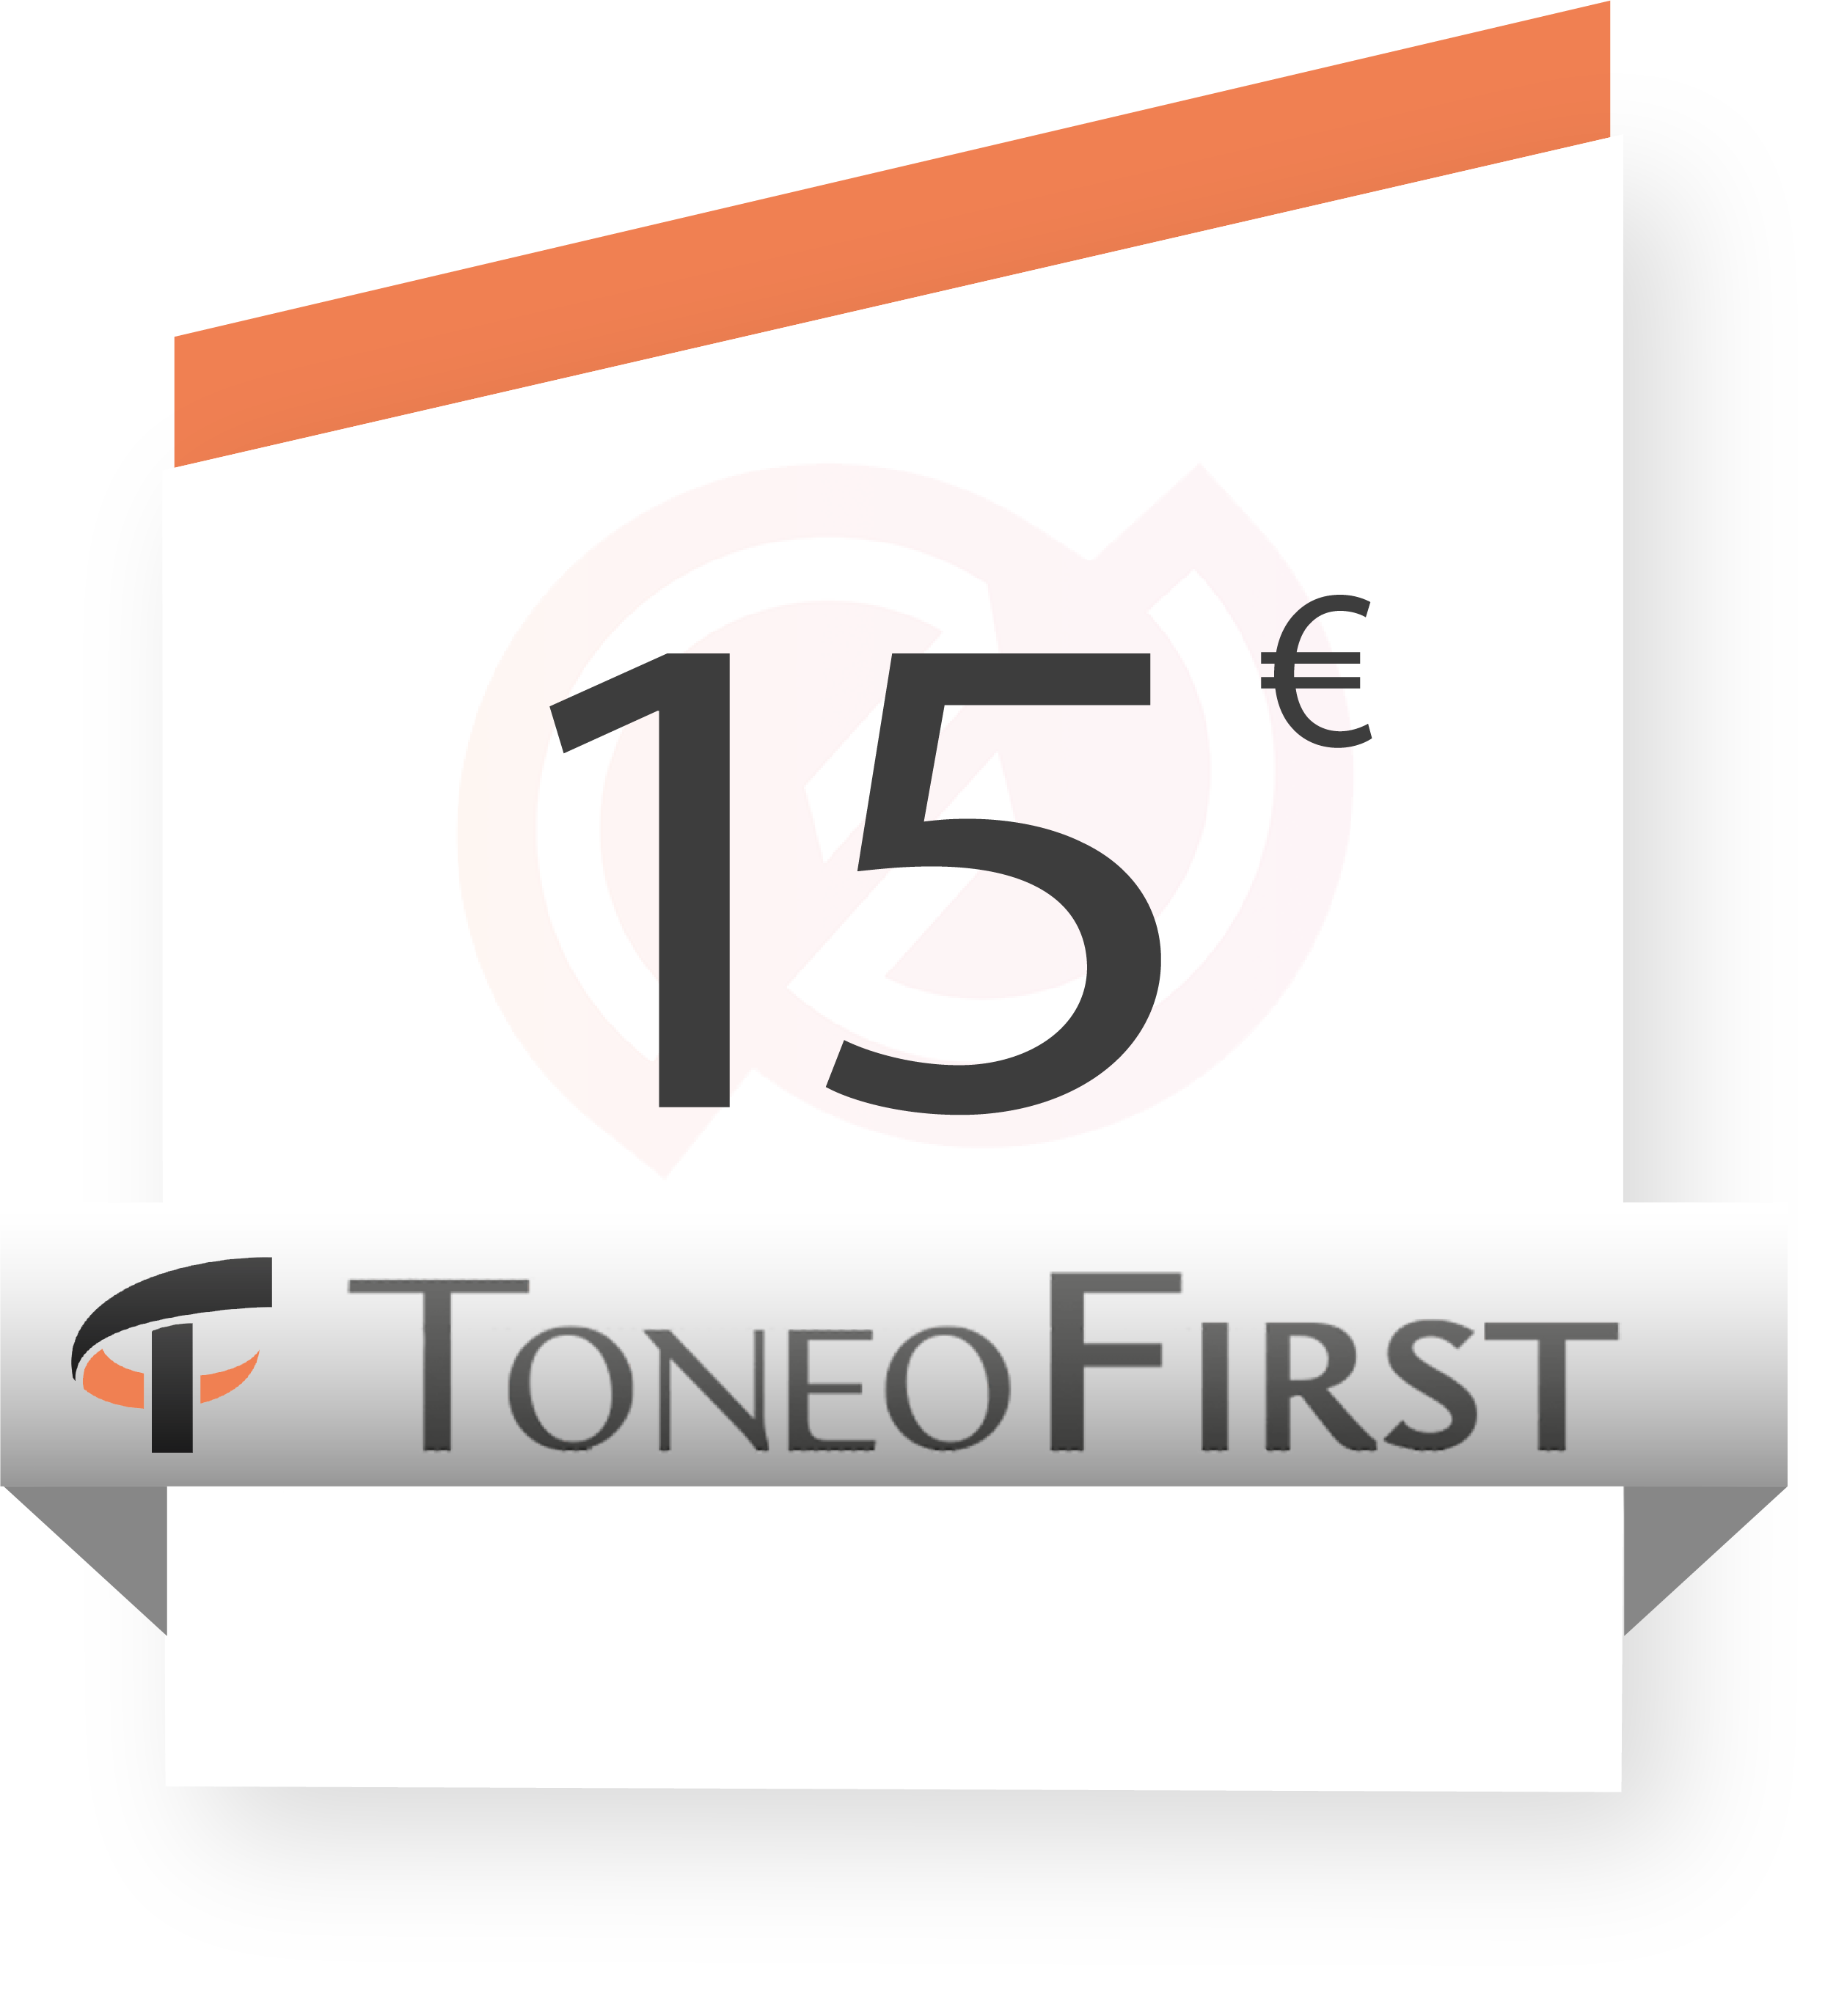 Toneo First 15€